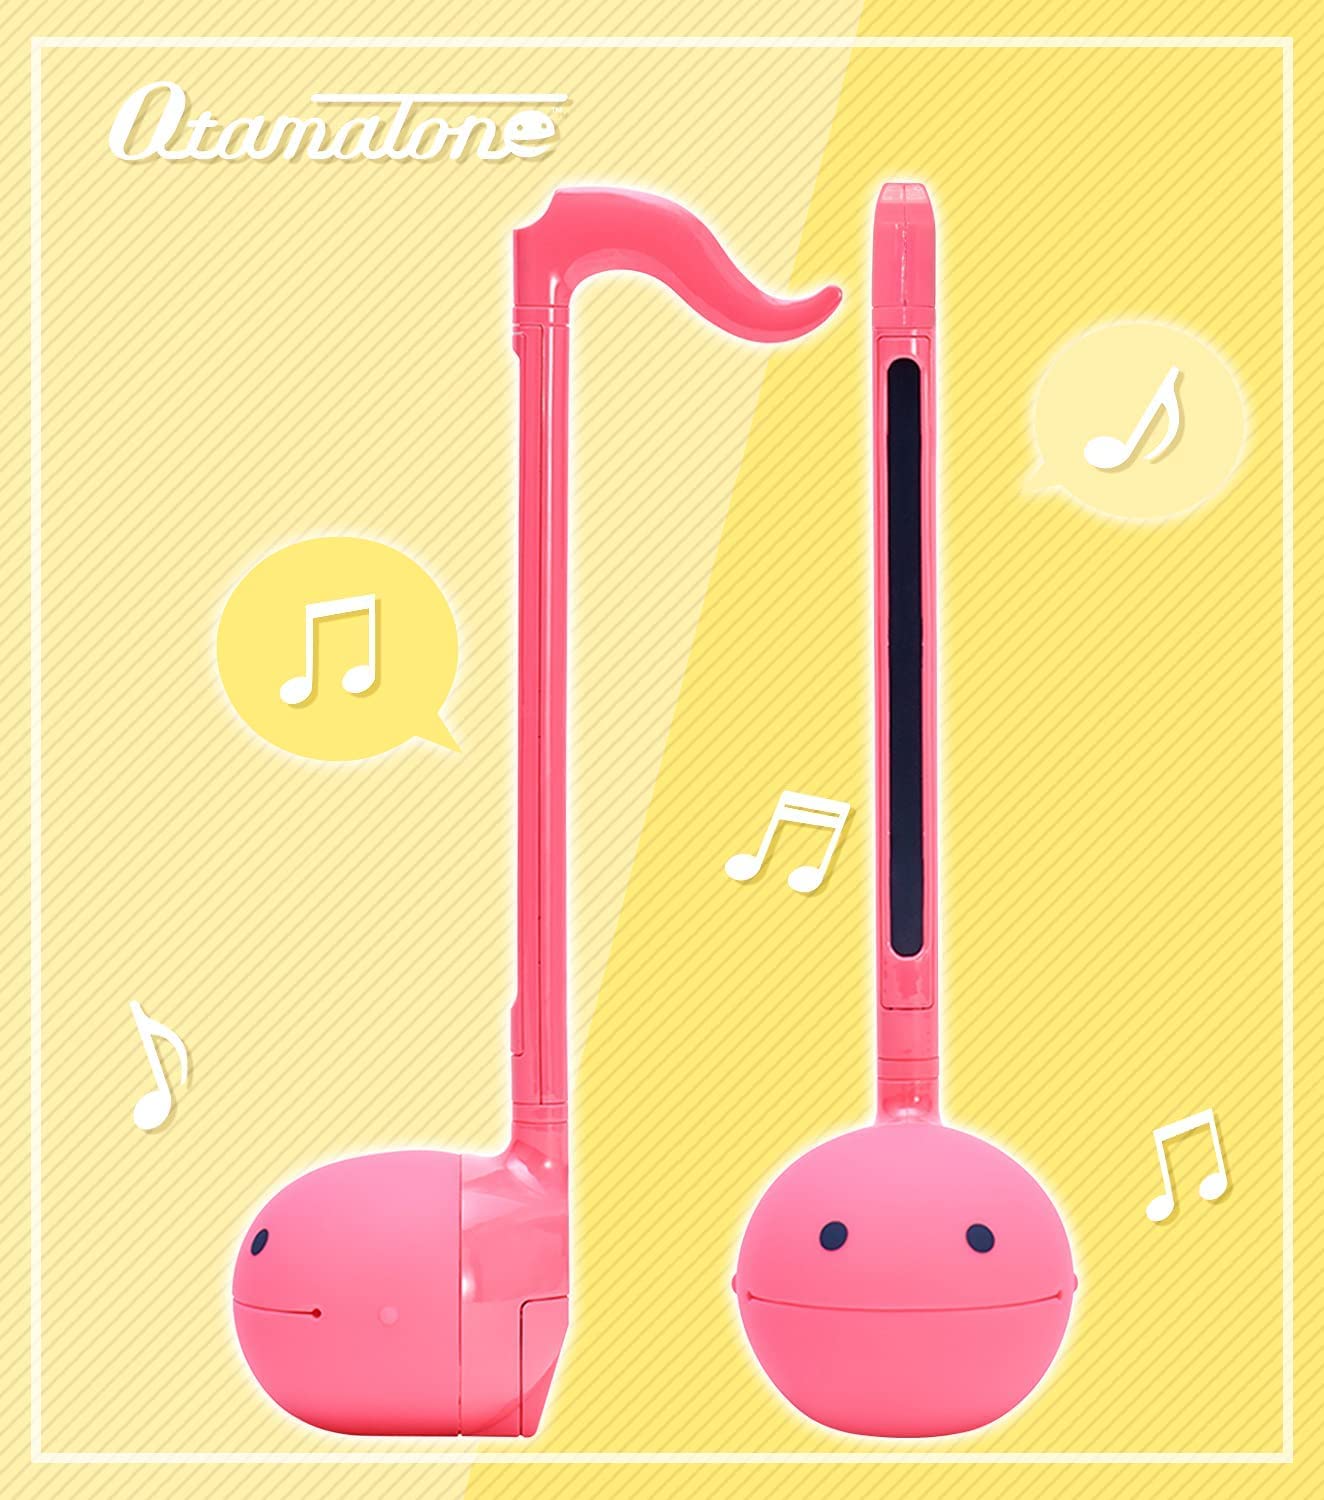 Otamatone [Color Series] Japanese Electronic Musical Instrument Portable Synthesizer from Japan by Cube/Maywa Denki [English version] [Regular size]-Yellow, Hot Pink set